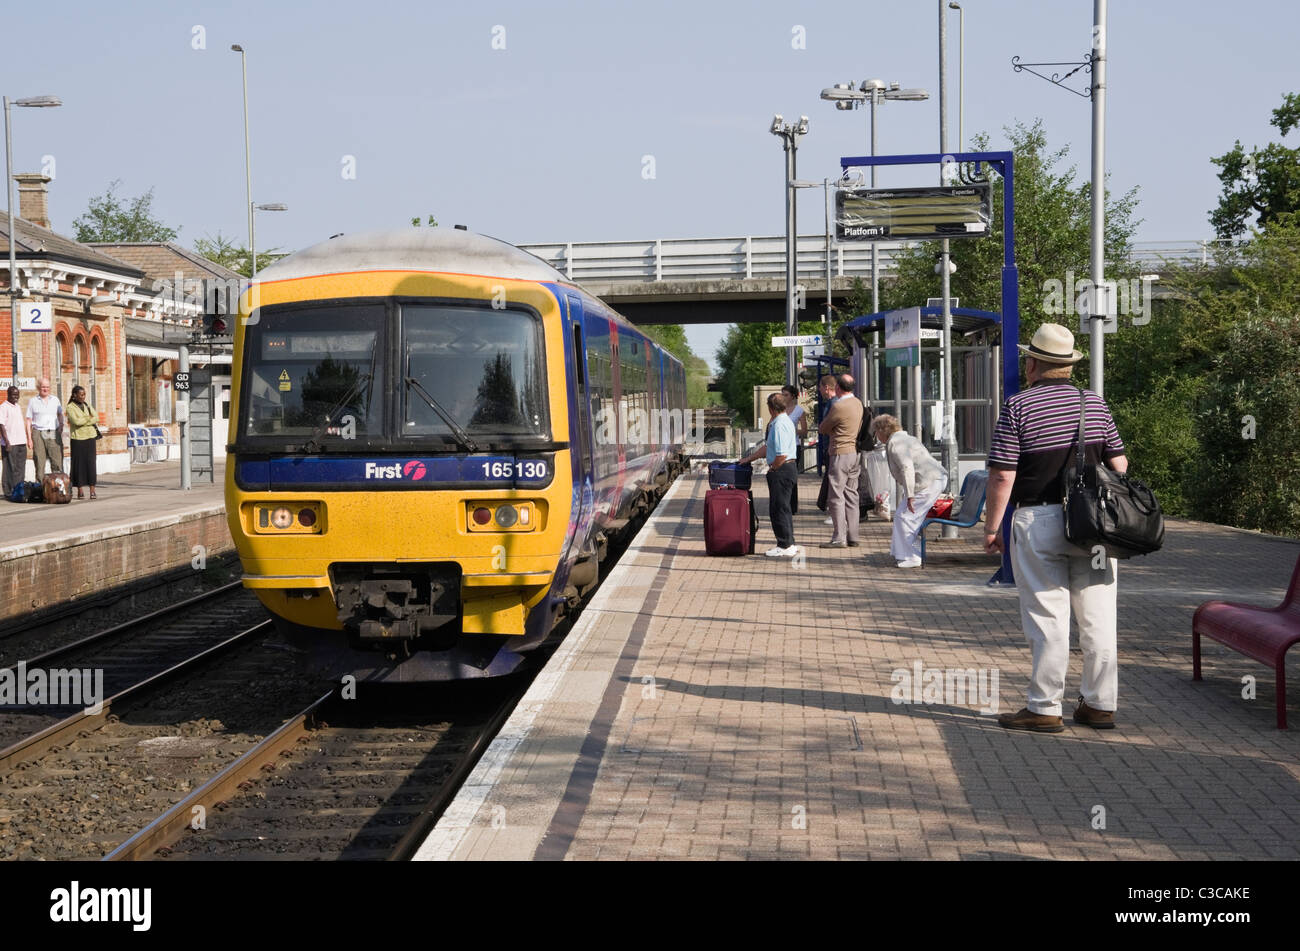 First Great Western train to Gatwick approaching railway station with passengers waiting on platform. North Camp, England, UK, Britain Stock Photo